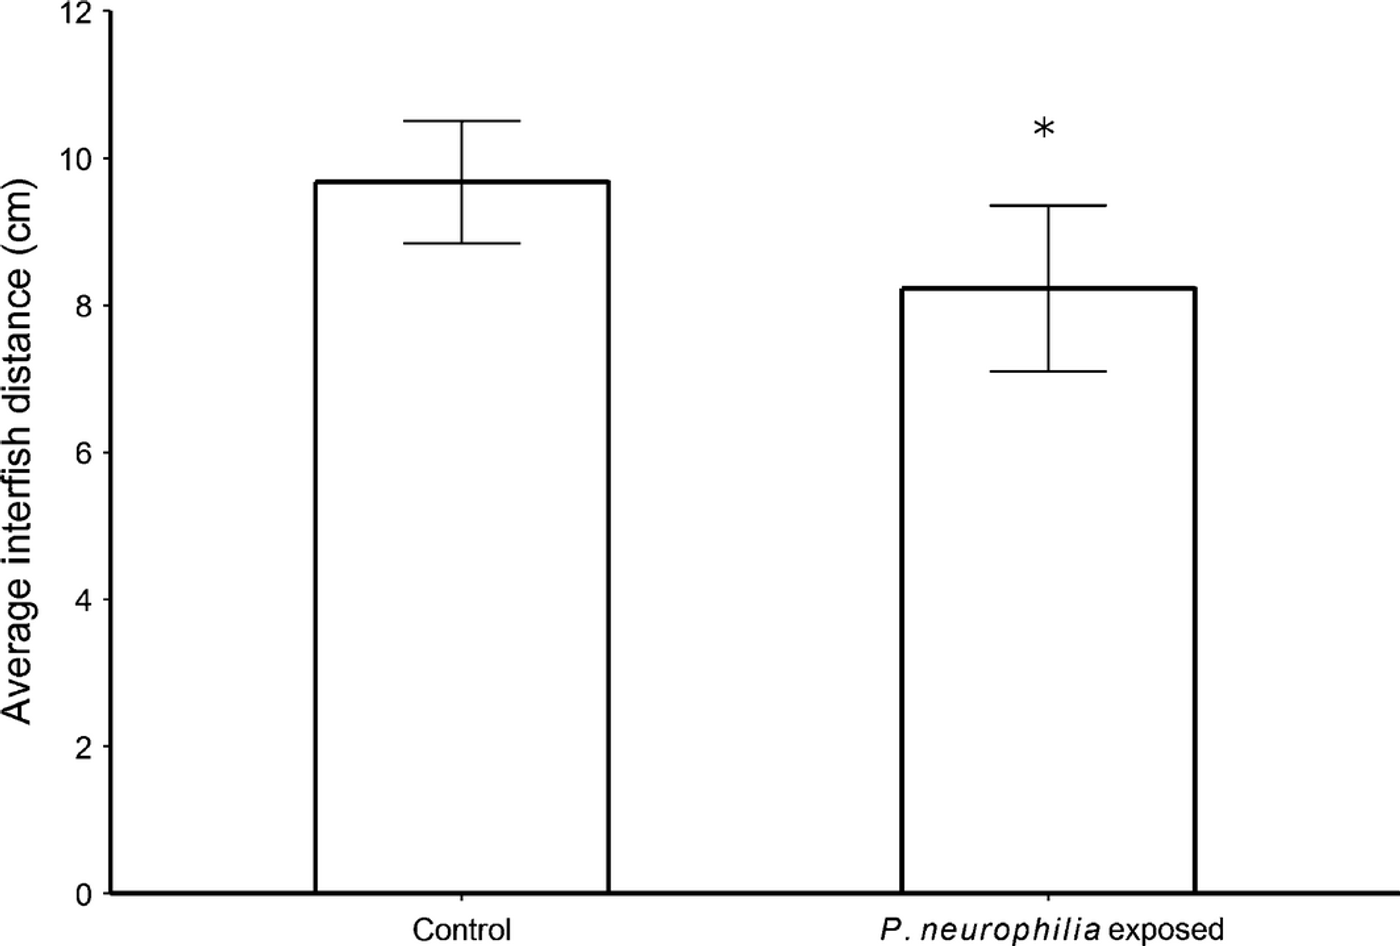 Effects of Pseudoloma neurophilia exposure on shoaling behaviour of zebrafish. Exposure to P. neurophilia significantly decreased the average interfish distance with 12 shoals (tanks), six exposed and six controls. *P = 0.026, U-test. / Credit: Journal of Fish Diseases